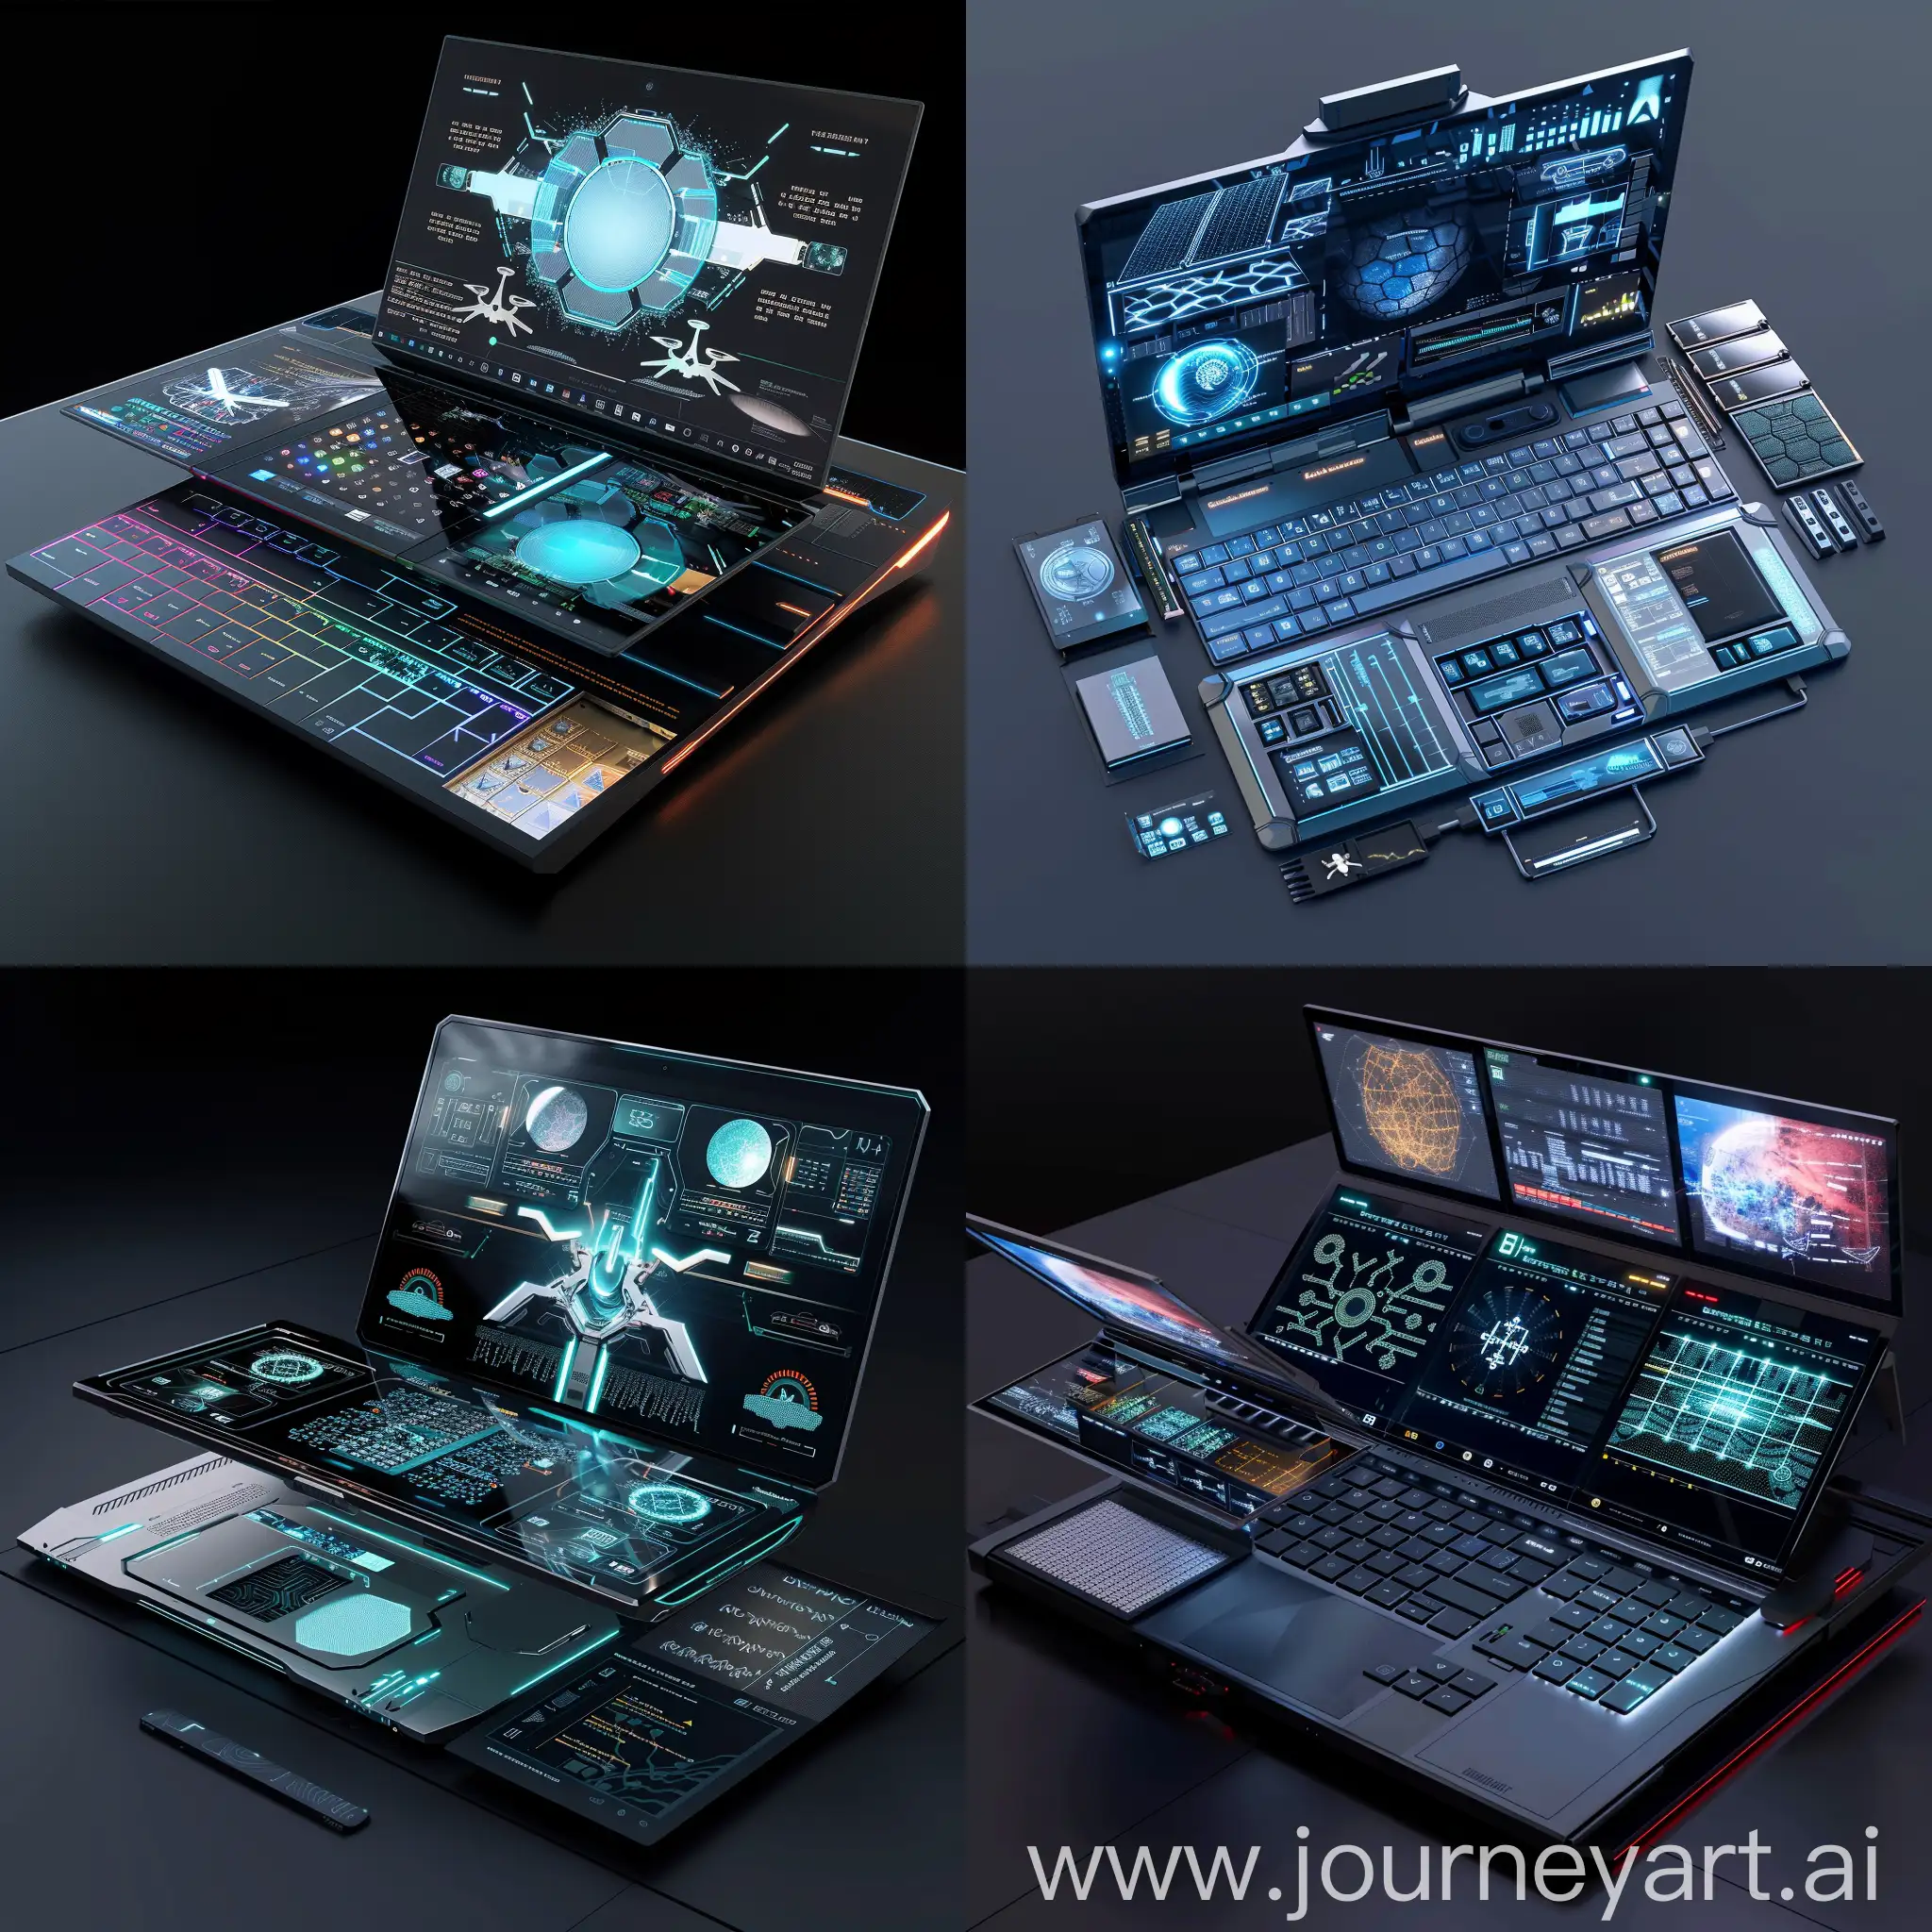 Futuristic laptop, in futuristic style, Quantum Computing Chips, Neural Network Processing Units (NPUs), Graphene Batteries, Holographic Storage, Adaptive Display Technology, Integrated Biometric Sensors, Photonic Processors, Smart Thermal Management Systems, Modular Component Design, Nano-Tech Based Enhancements, Flexible and Foldable Displays, Holographic and AR Interfaces, Solar-Powered Surfaces, Haptic Feedback Touchpads and Keyboards, E-Paper Secondary Displays, Biometric Security Integration, Adaptive Ergonomics, Material Innovation, Edge-to-Edge Displays, Integrated Wireless Charging, Built-in Projector, 360-Degree Surround Sound Speakers, AI-Powered Virtual Assistant, Integrated Drone, Enhanced Thermal Imaging, Multi-Functional Stylus, Modular Expansion Ports, Microbial Sterilization System, Advanced Biometric Monitoring, Holographic Keyboard, Holographic Display Projection, Retractable Second Screen, Solar-Powered Charging Panels, Modular Expansion Slots, Biometric Authentication System, Wireless Charging Surface, Smart Hinge Technology, E-Ink Keyboard, Integrated Camera Drones, Self-Cleaning Surfaces, unreal engine 5 --stylize 1000